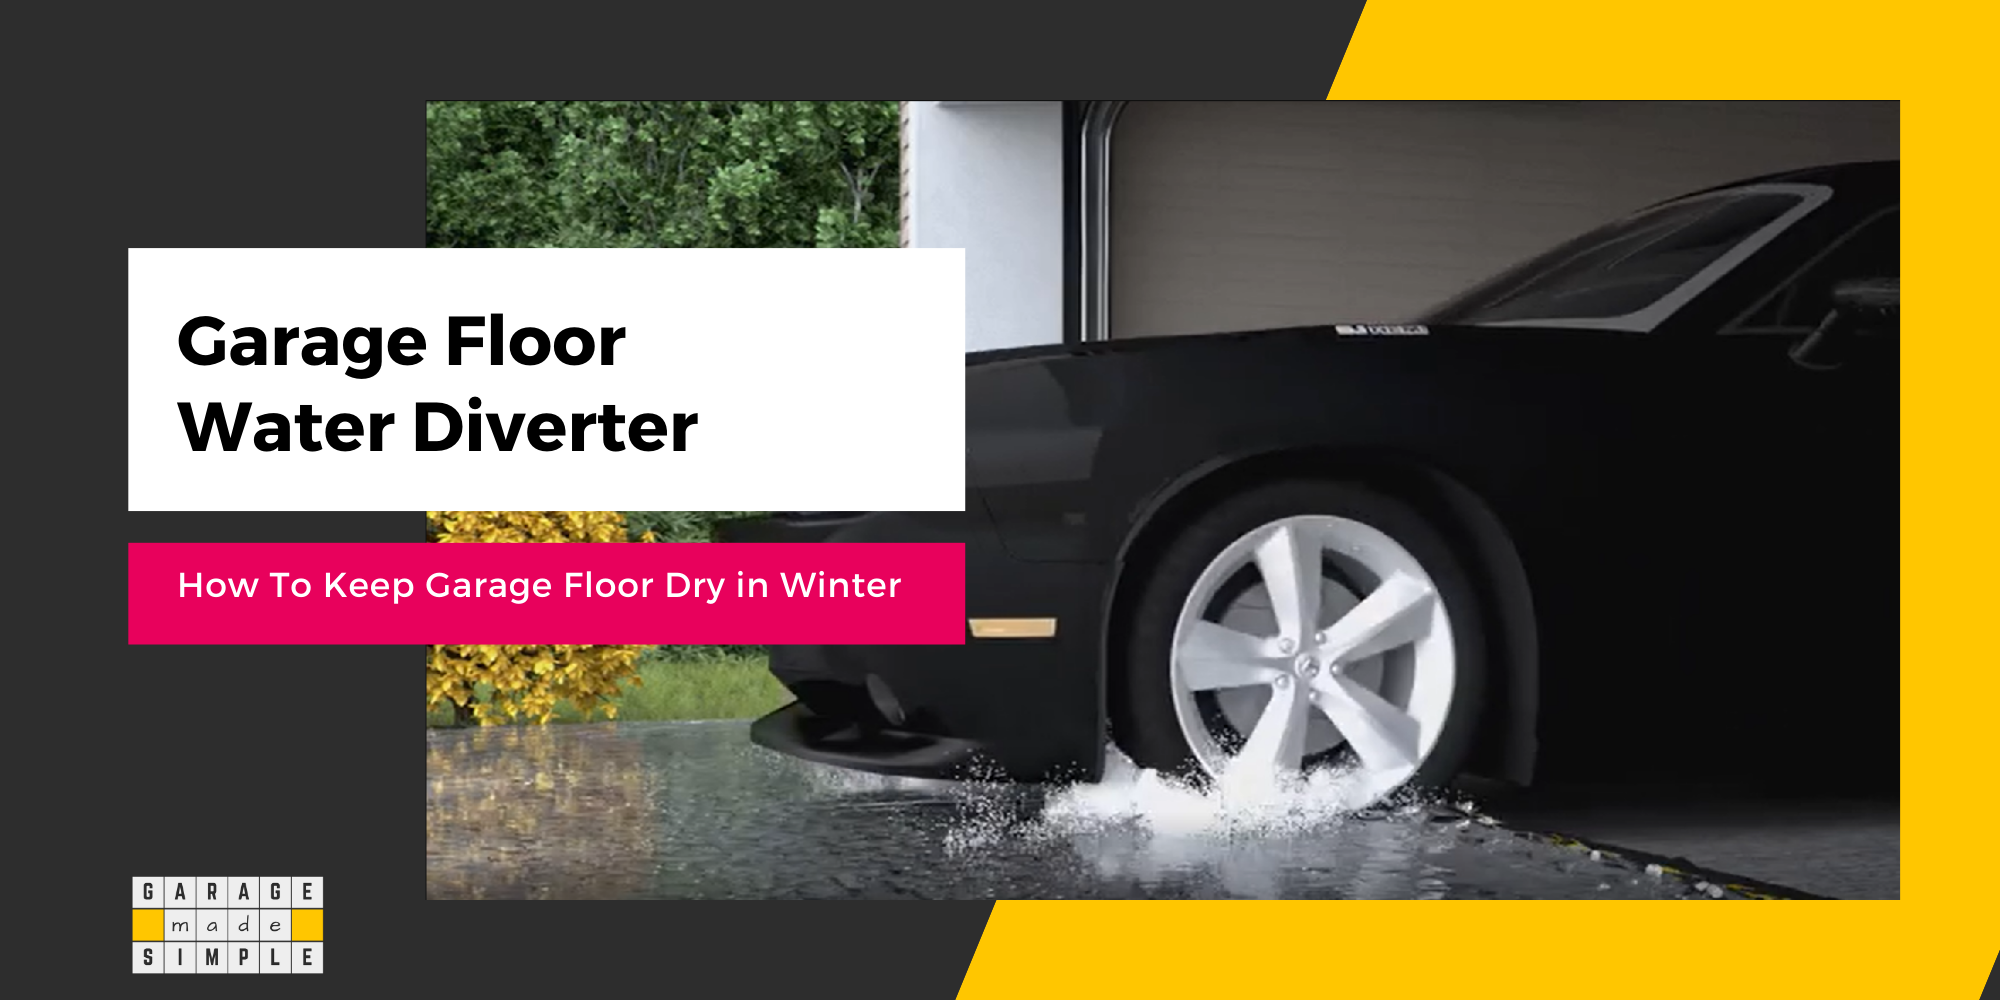 Why Garage Floor Water Diverter Is The Best Way To Keep Water Out?